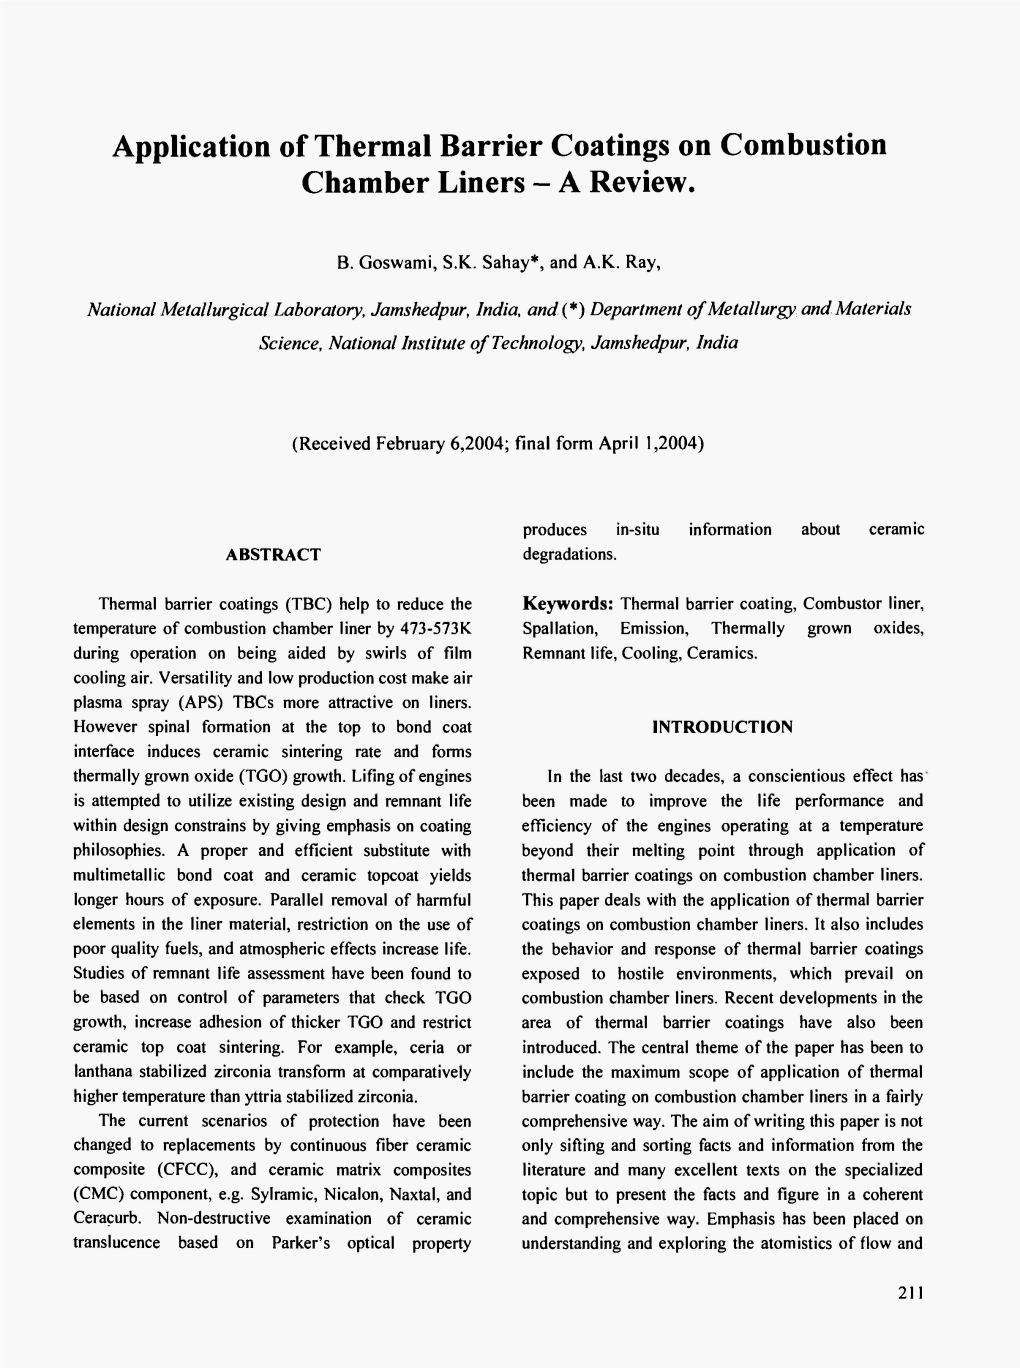 Application of Thermal Barrier Coatings on Combustion Chamber Liners - a Review